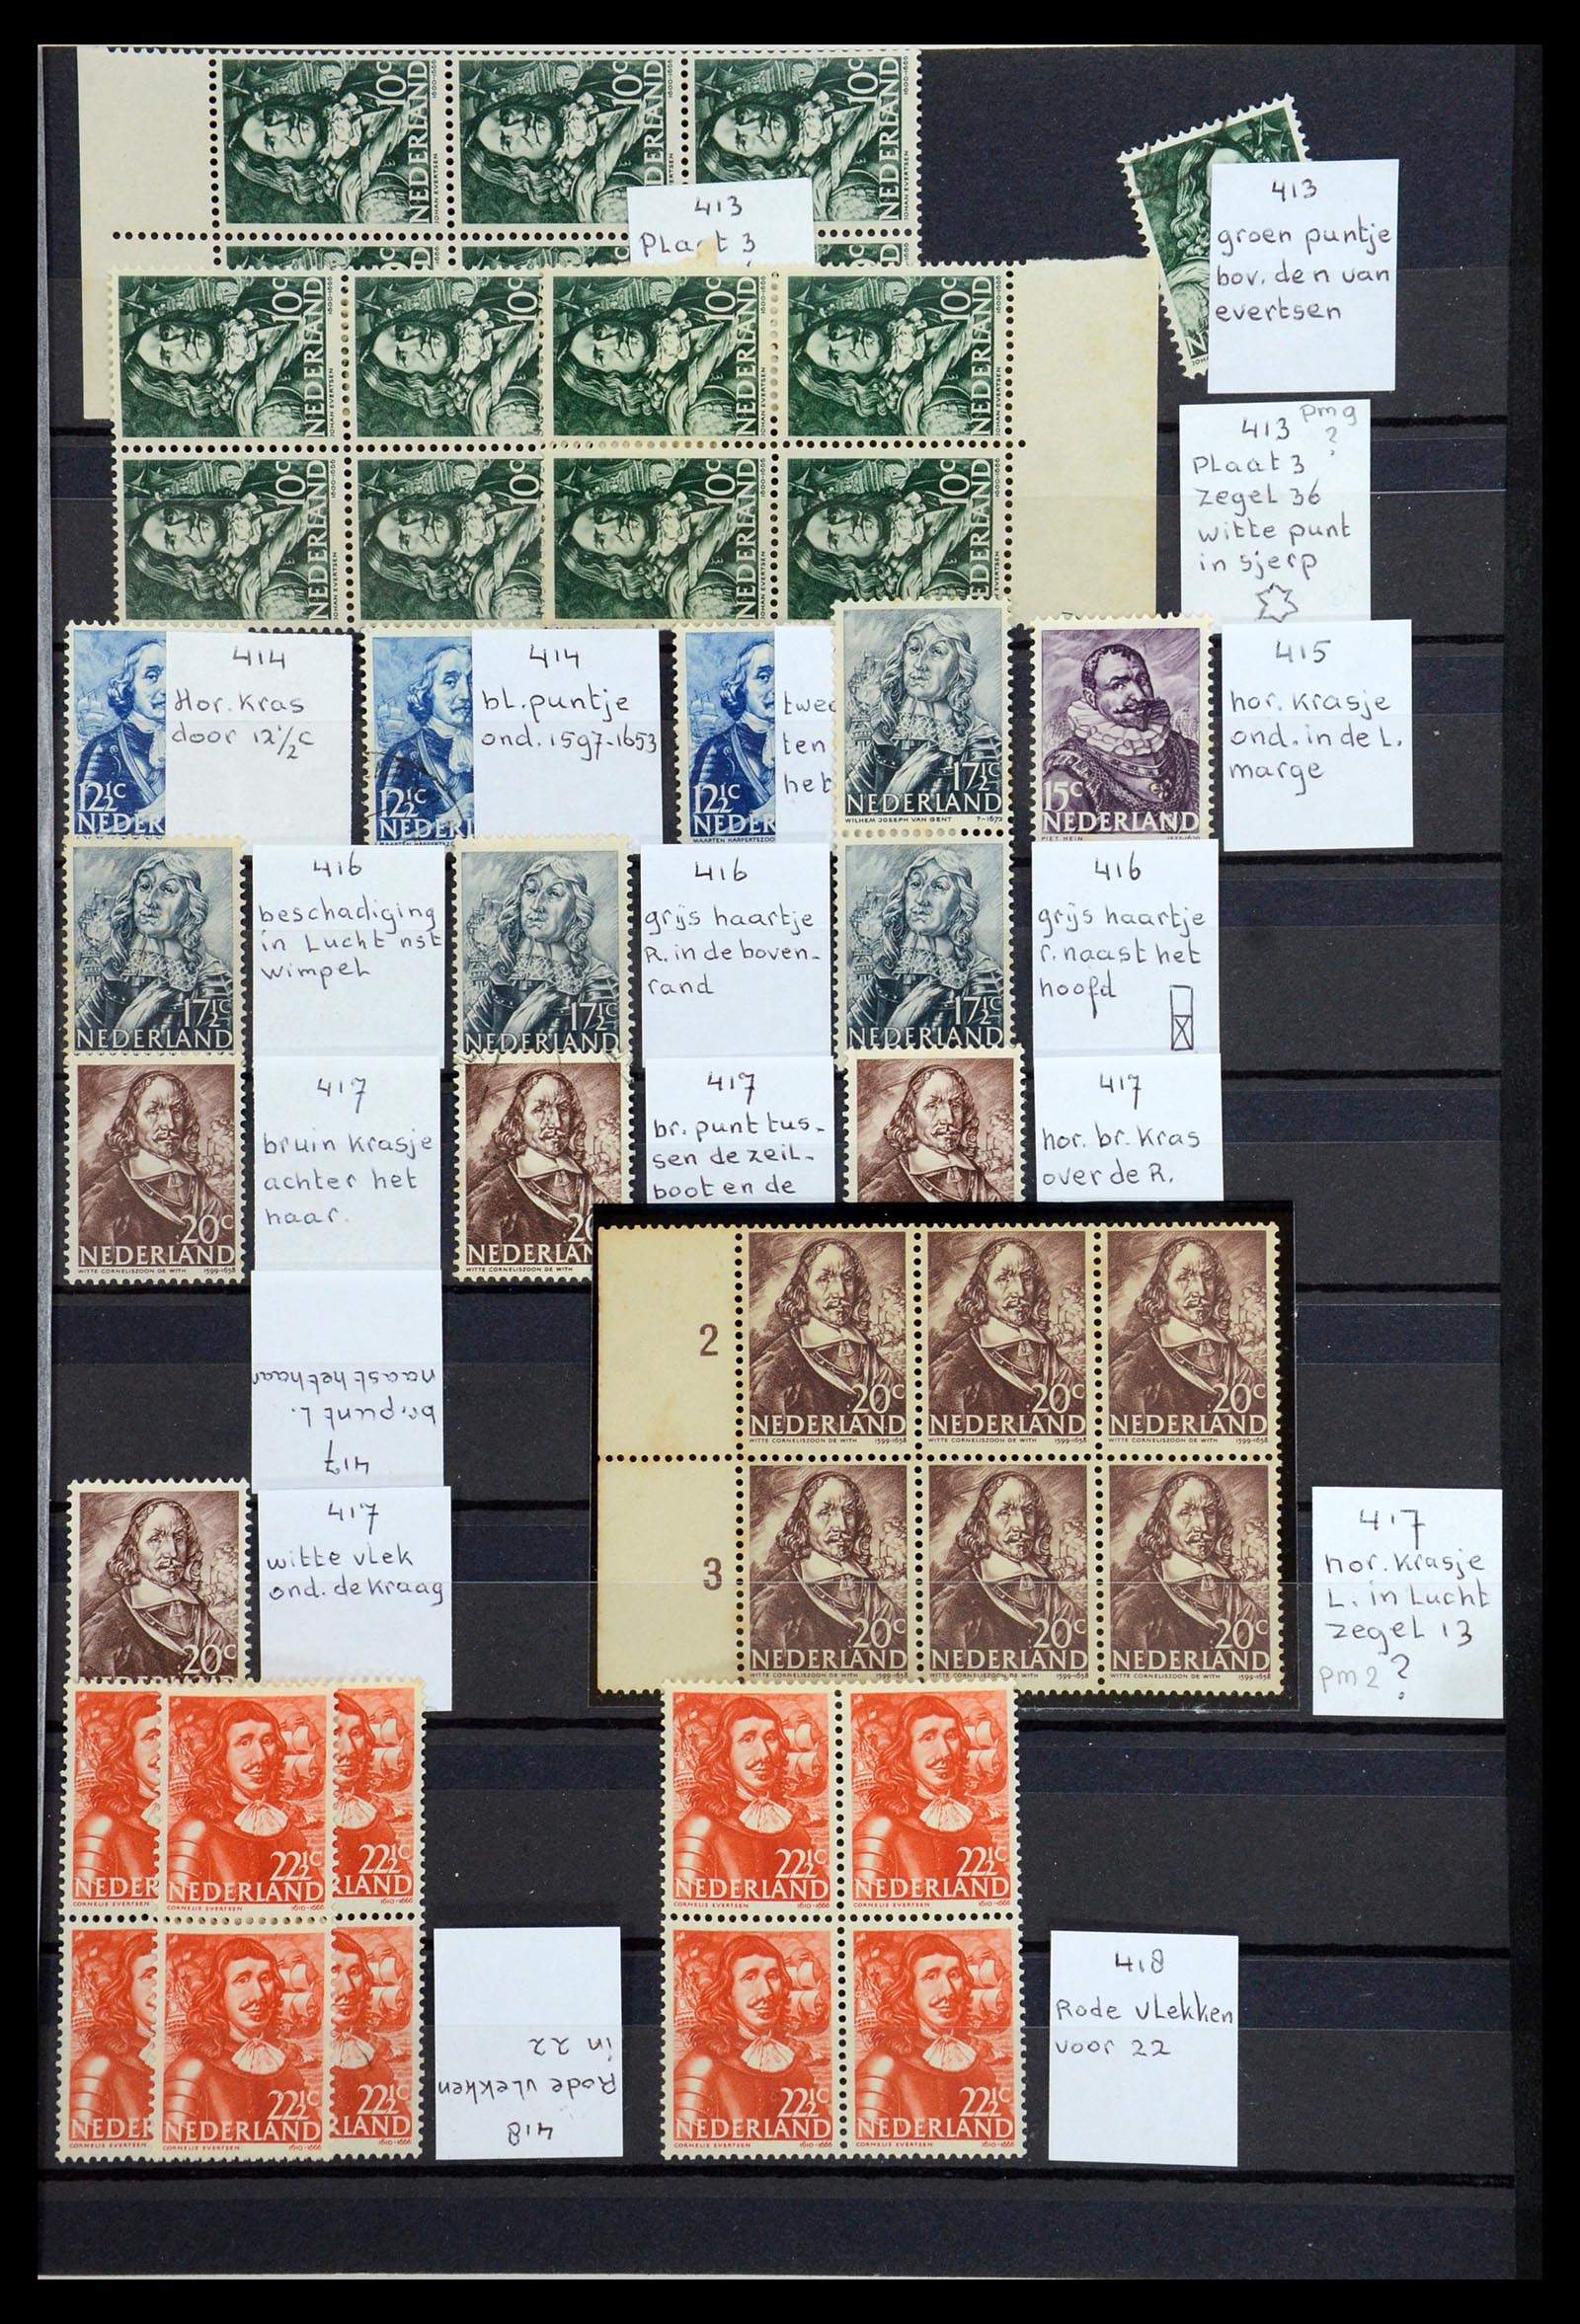 36376 015 - Stamp collection 36376 Netherlands plateflaws and varieties 1867-2008.